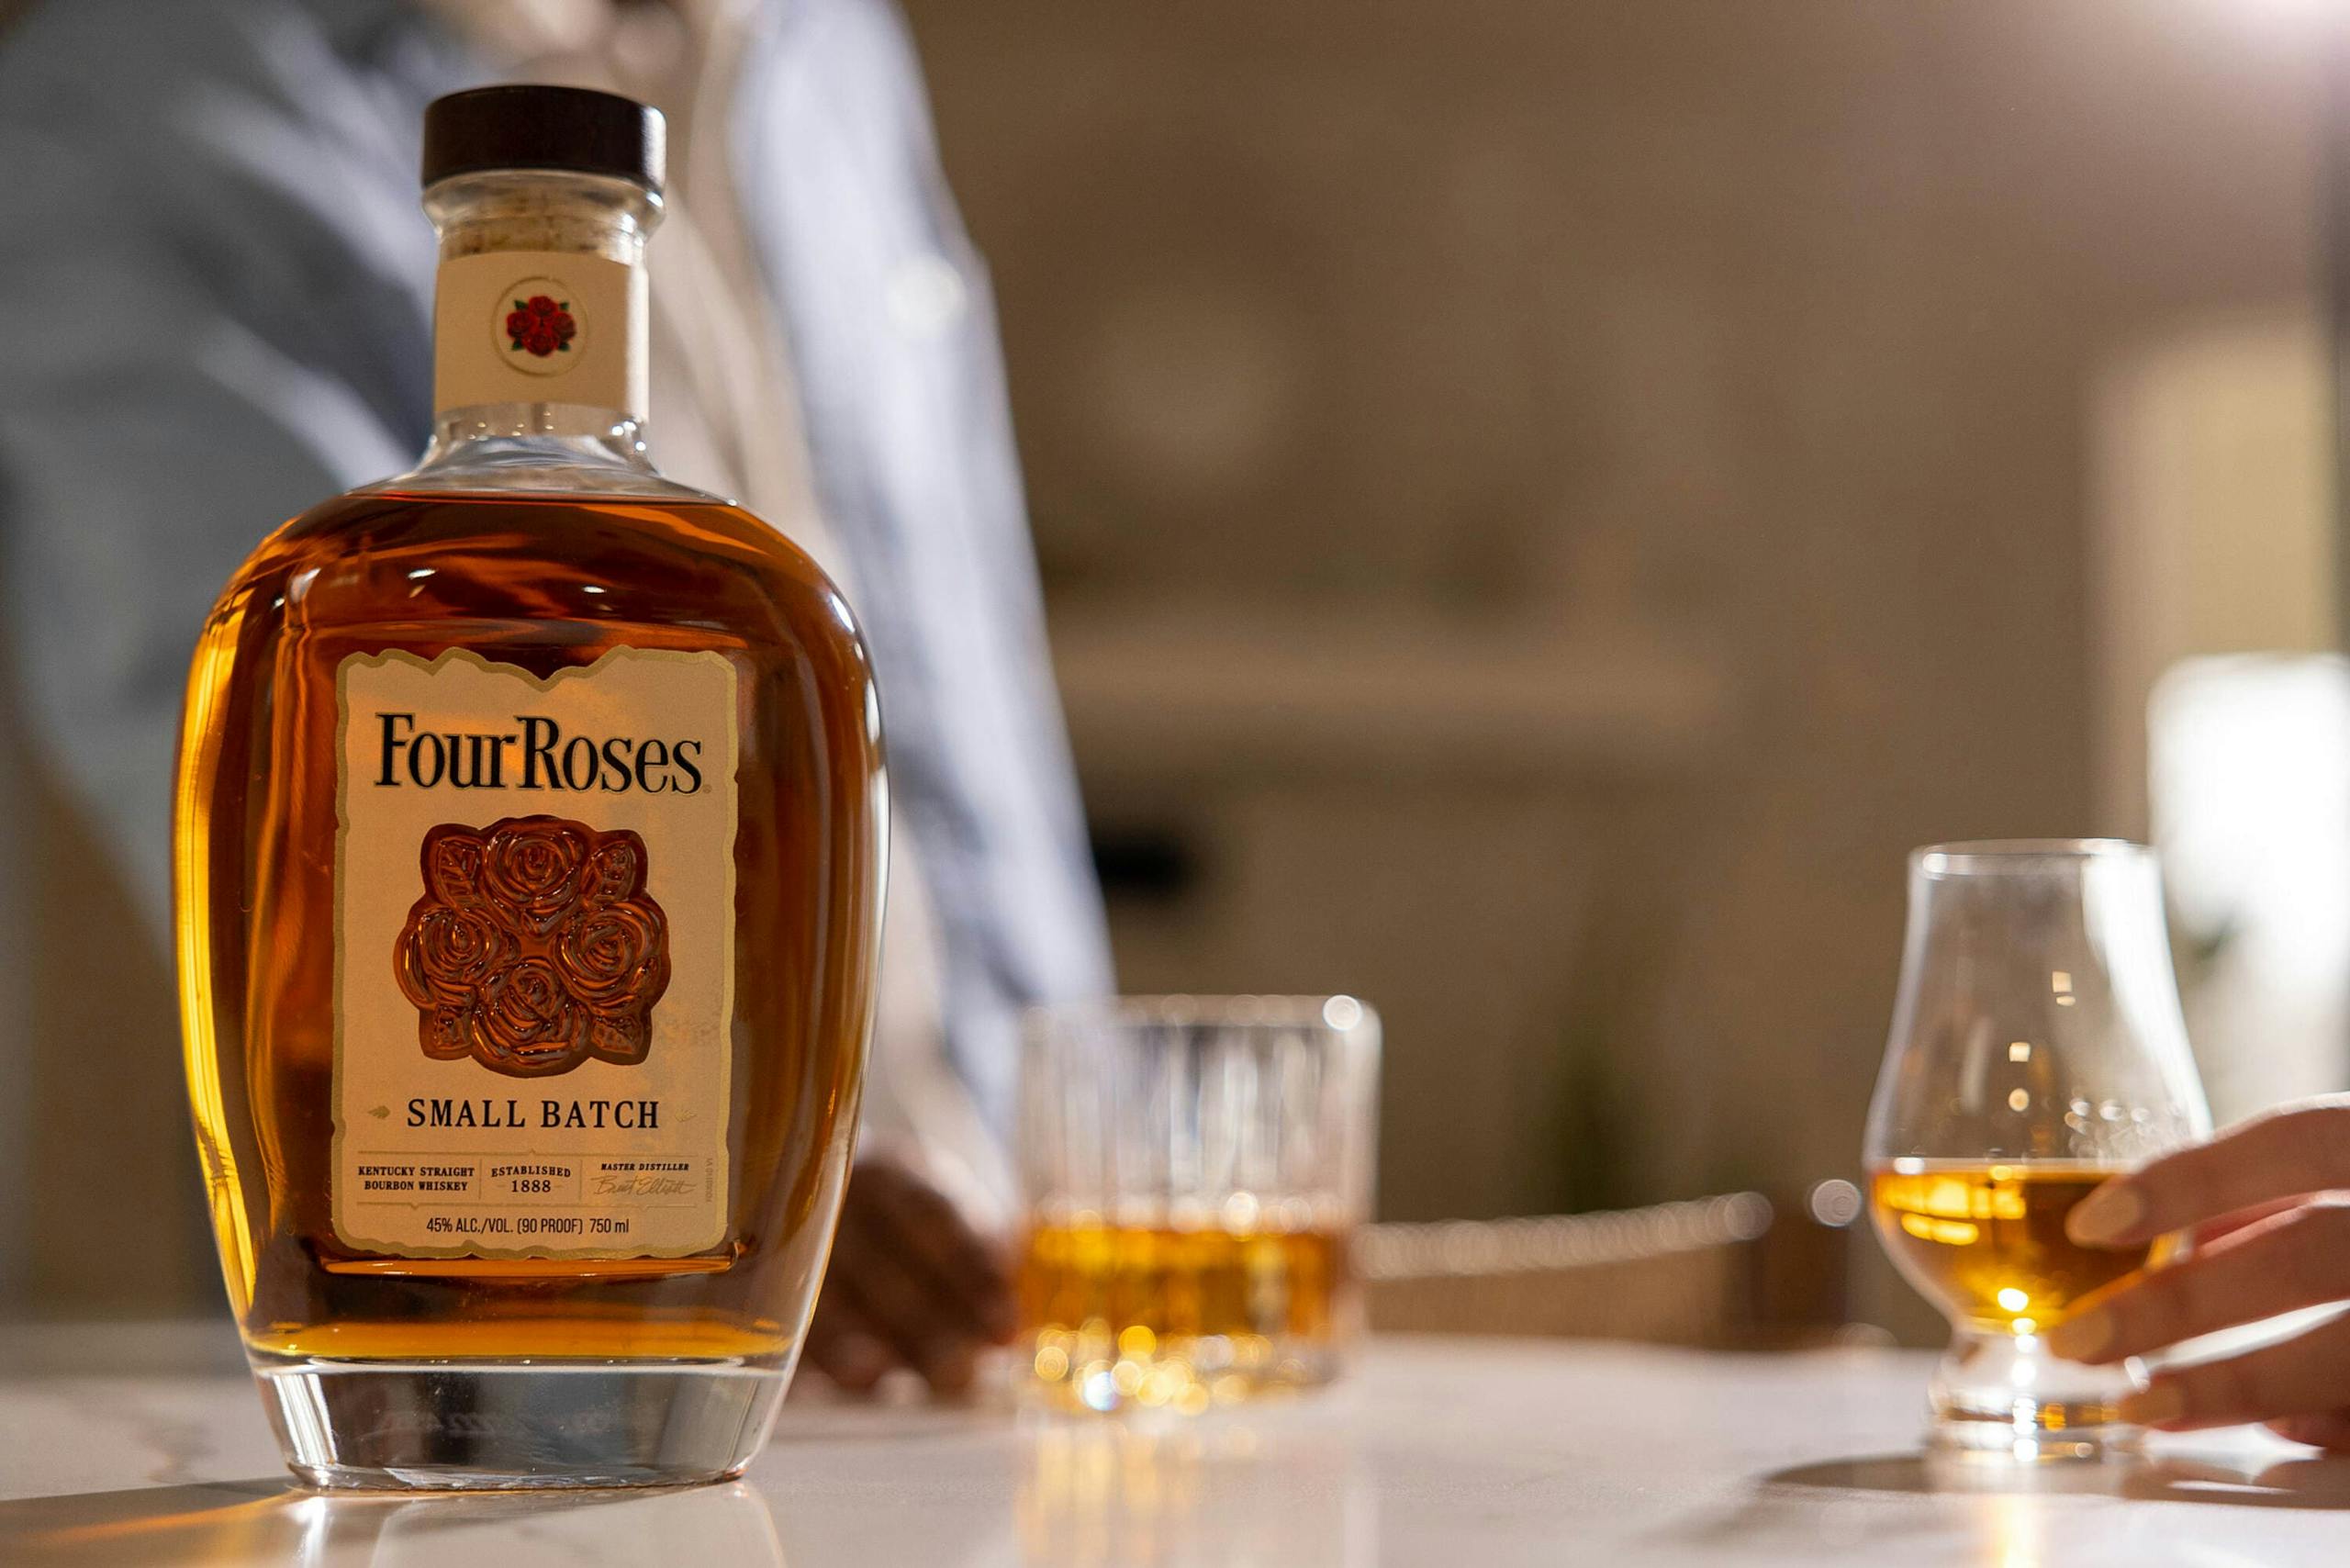 Couple chatting over Four Roses Small Batch